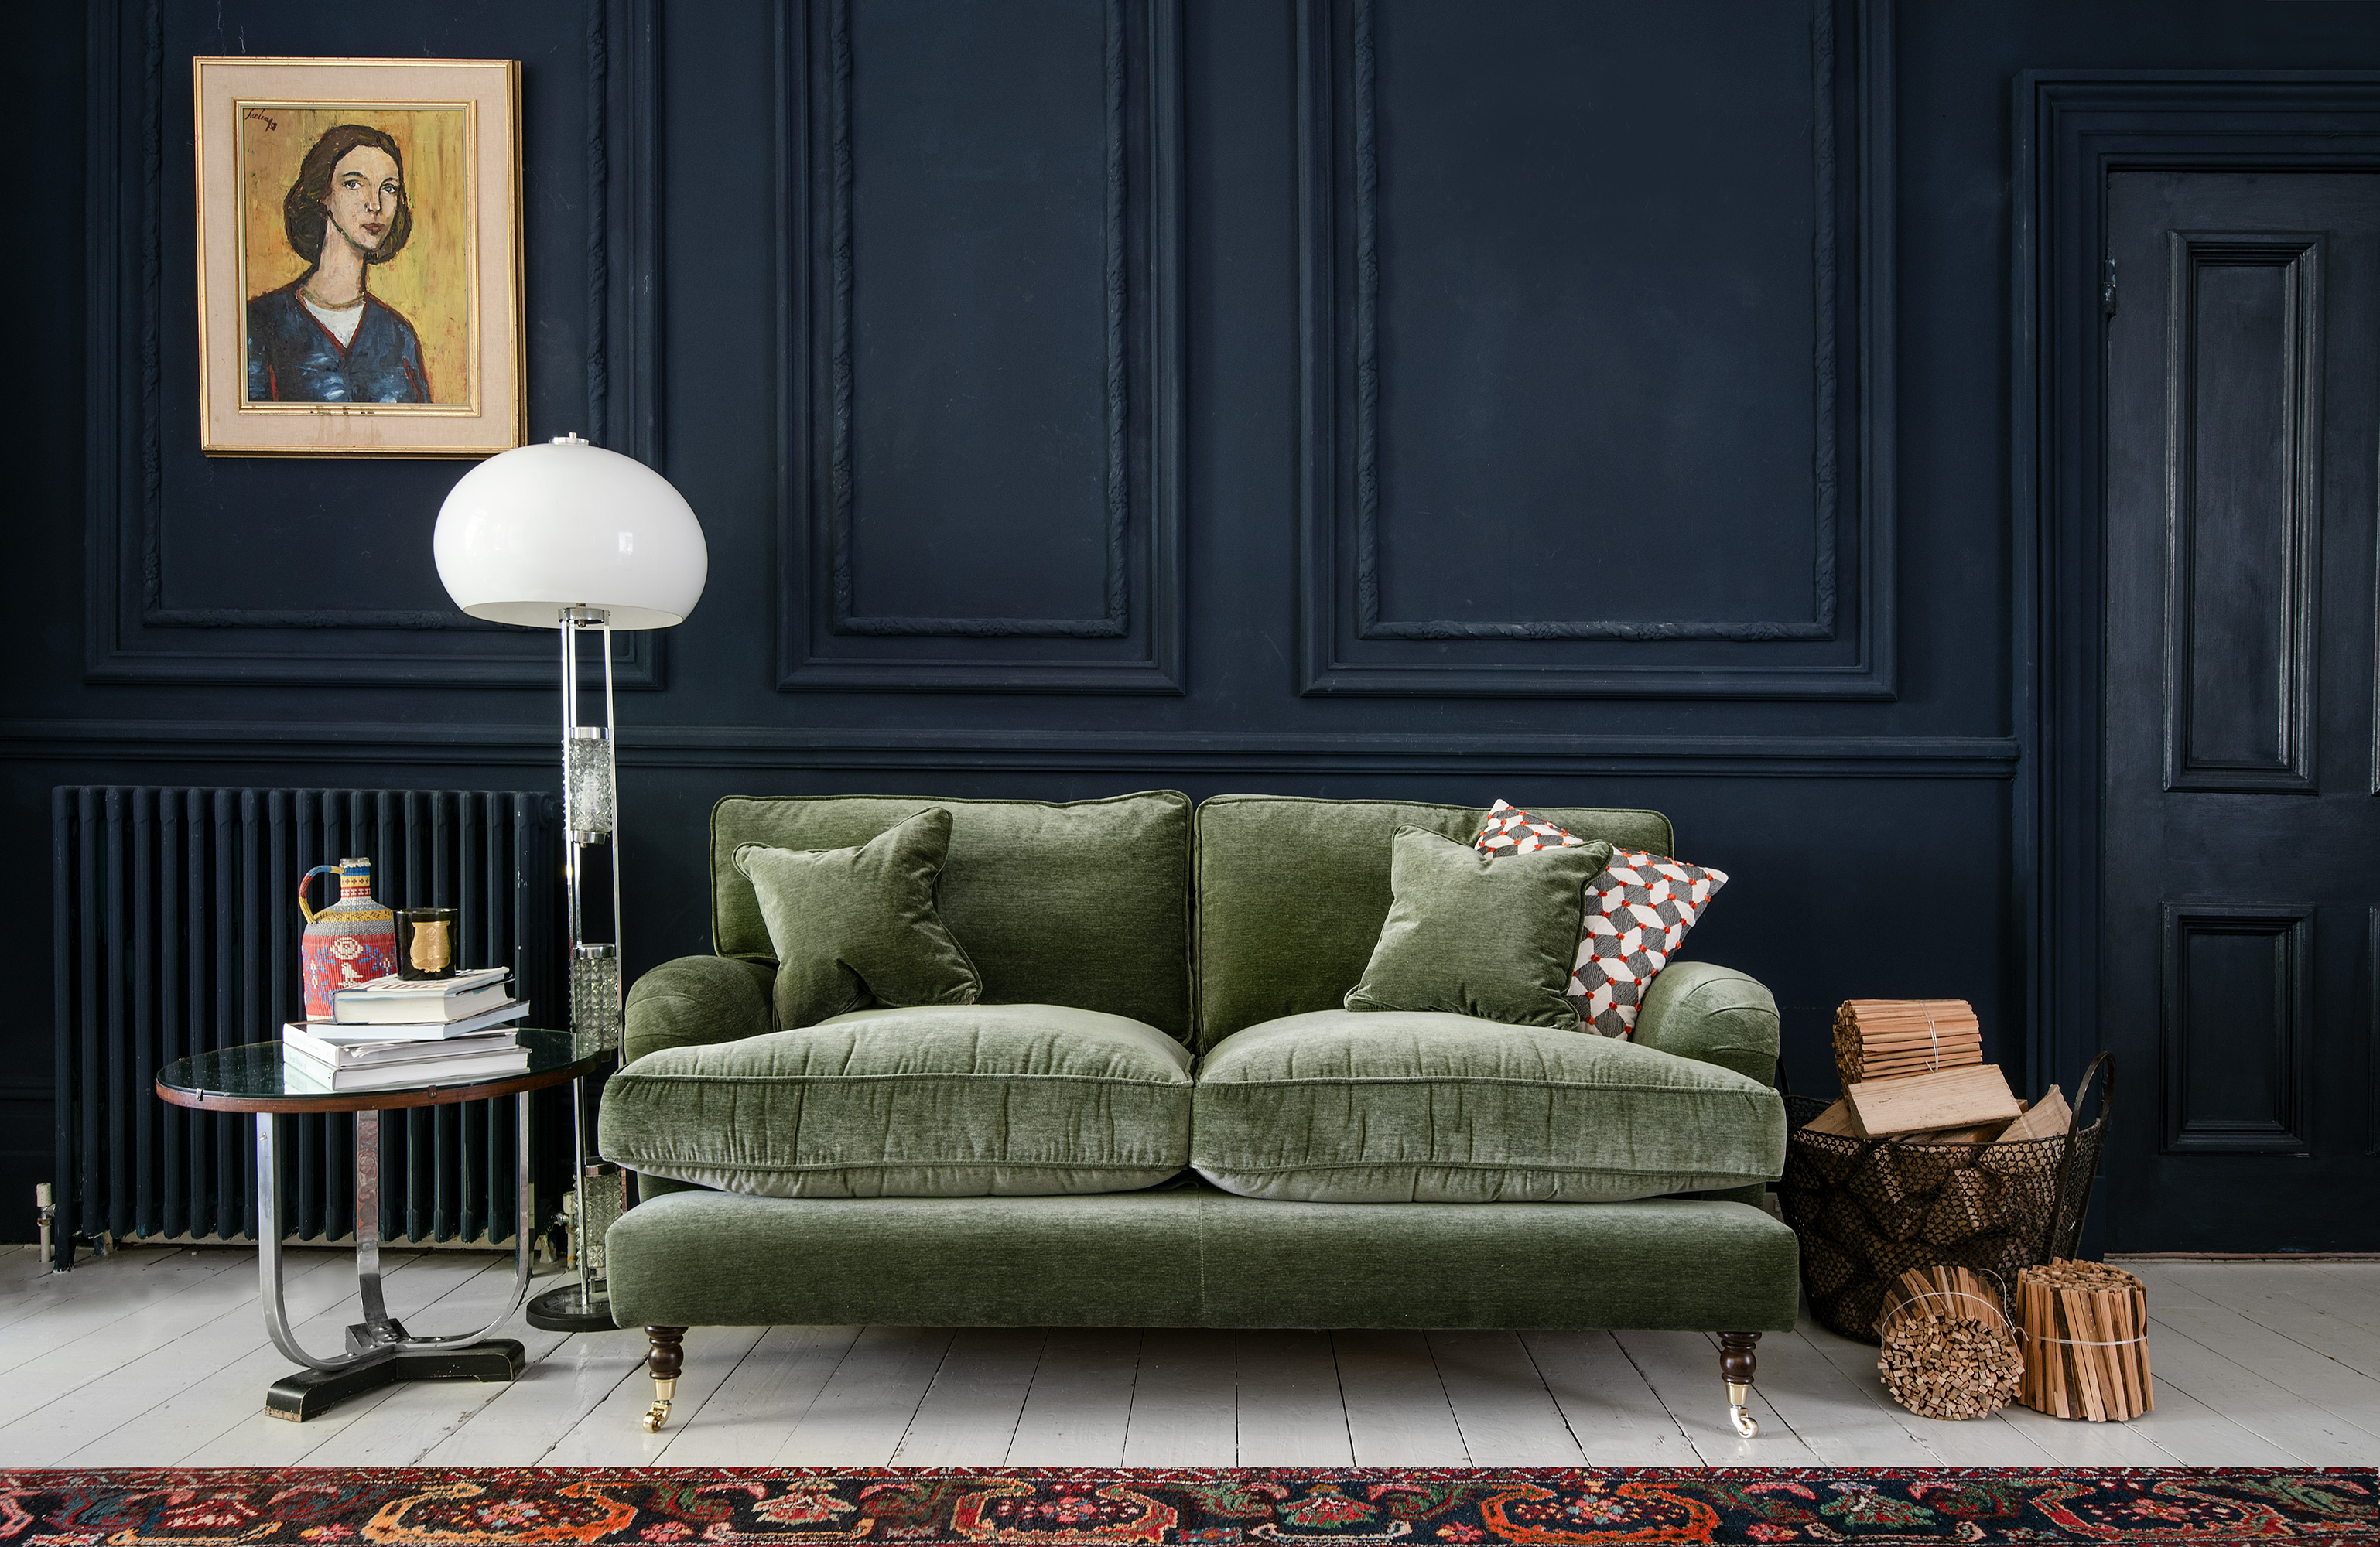 Sofas & Stuff on Twitter: "Our bestselling Alwinton sofa has featured in @homes_antiques with its rich colour, to an 'interior with substance'. Shop online with 15% off or